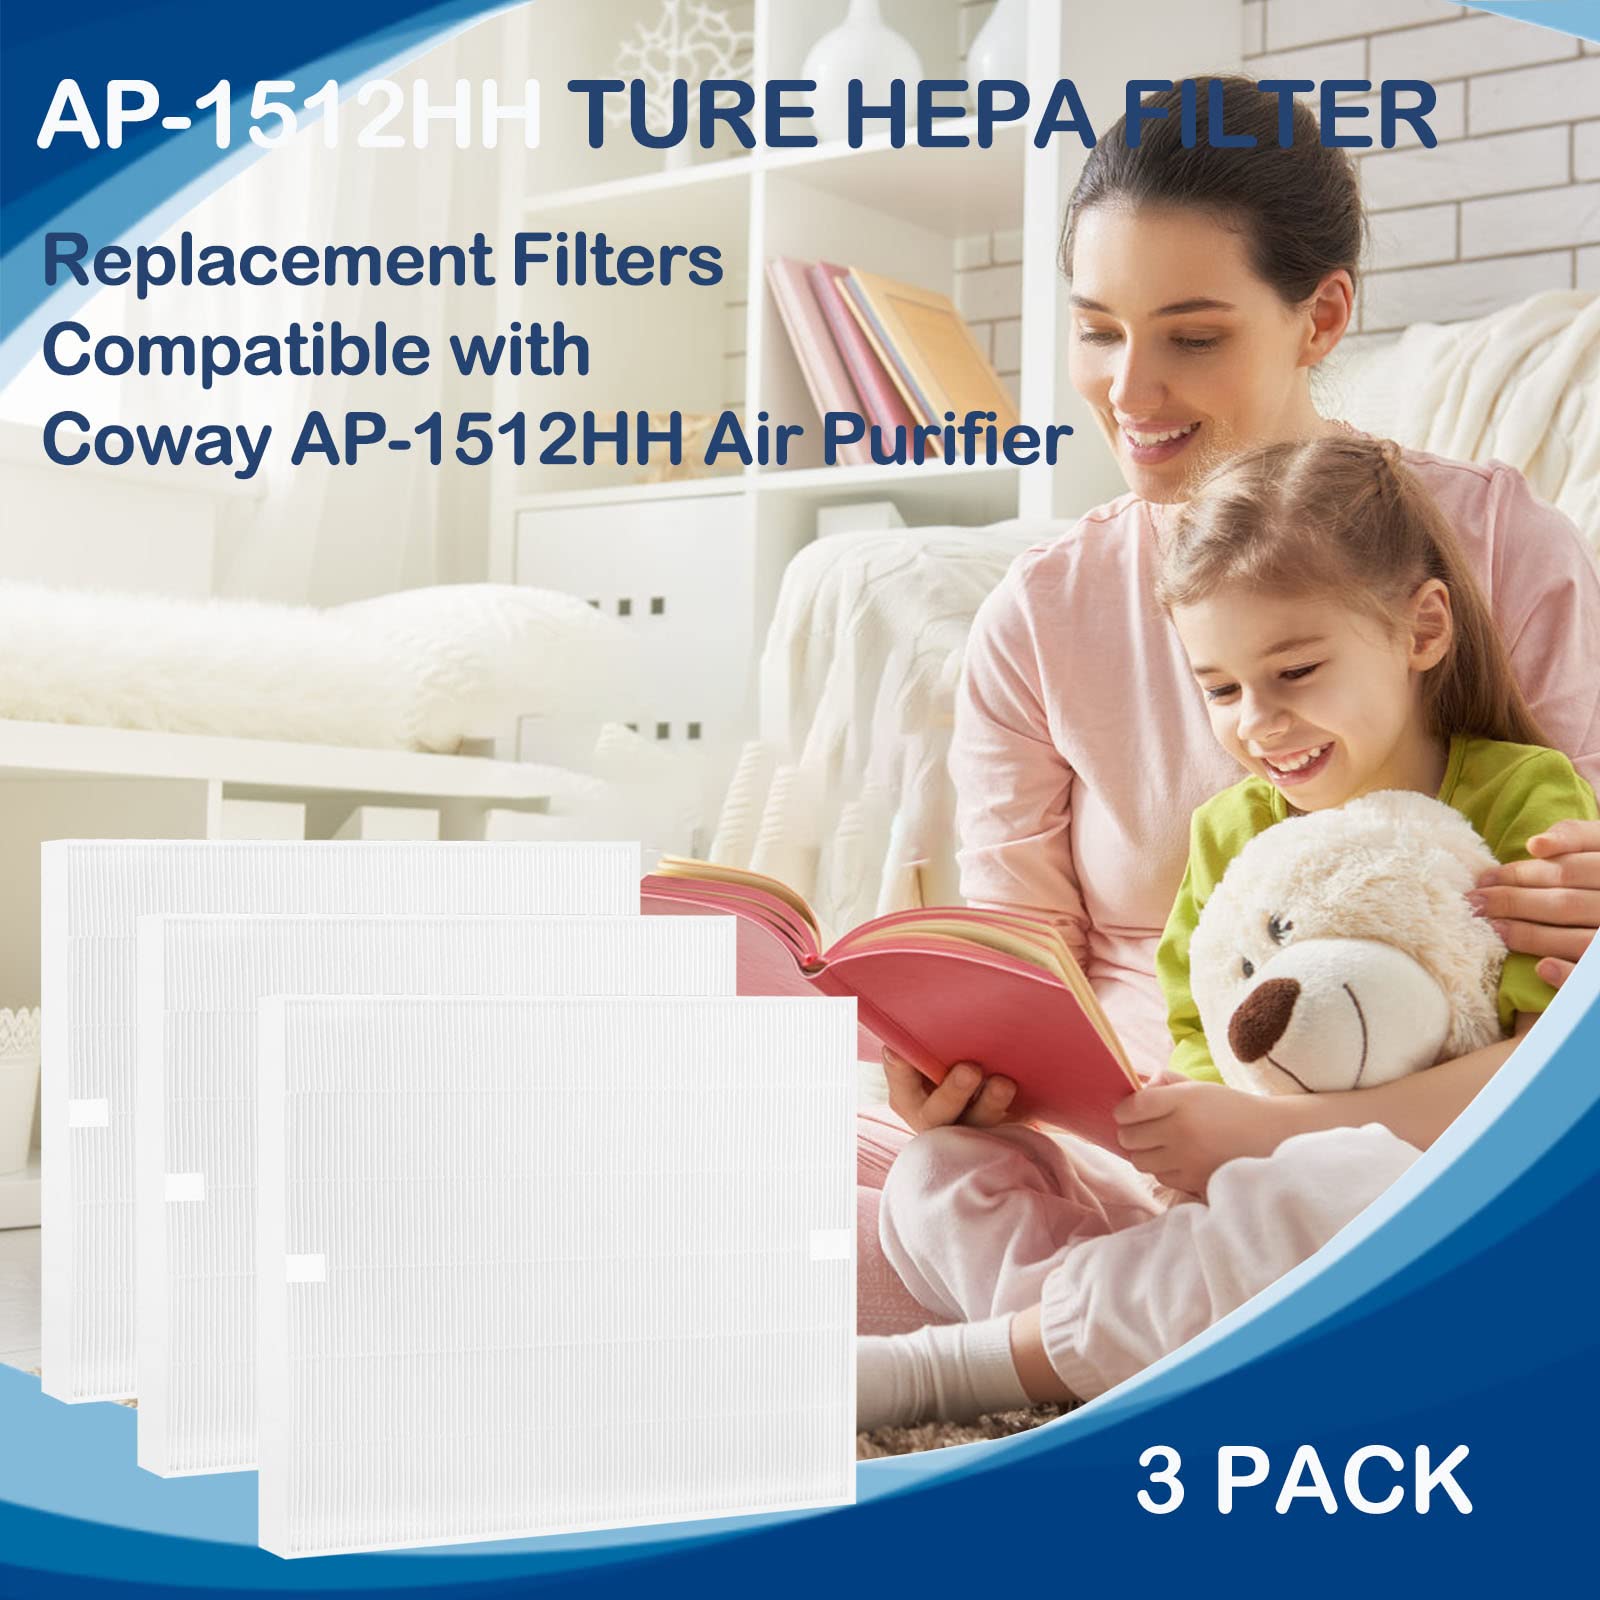 AP-1512HH True HEPA Filter Replacement Compatible with Coway AP-1512HH AP1512HHMighty Air Purifier, AP-1512HH-FP, Item NO #3304899, 3 Pack HEPA Filter Only